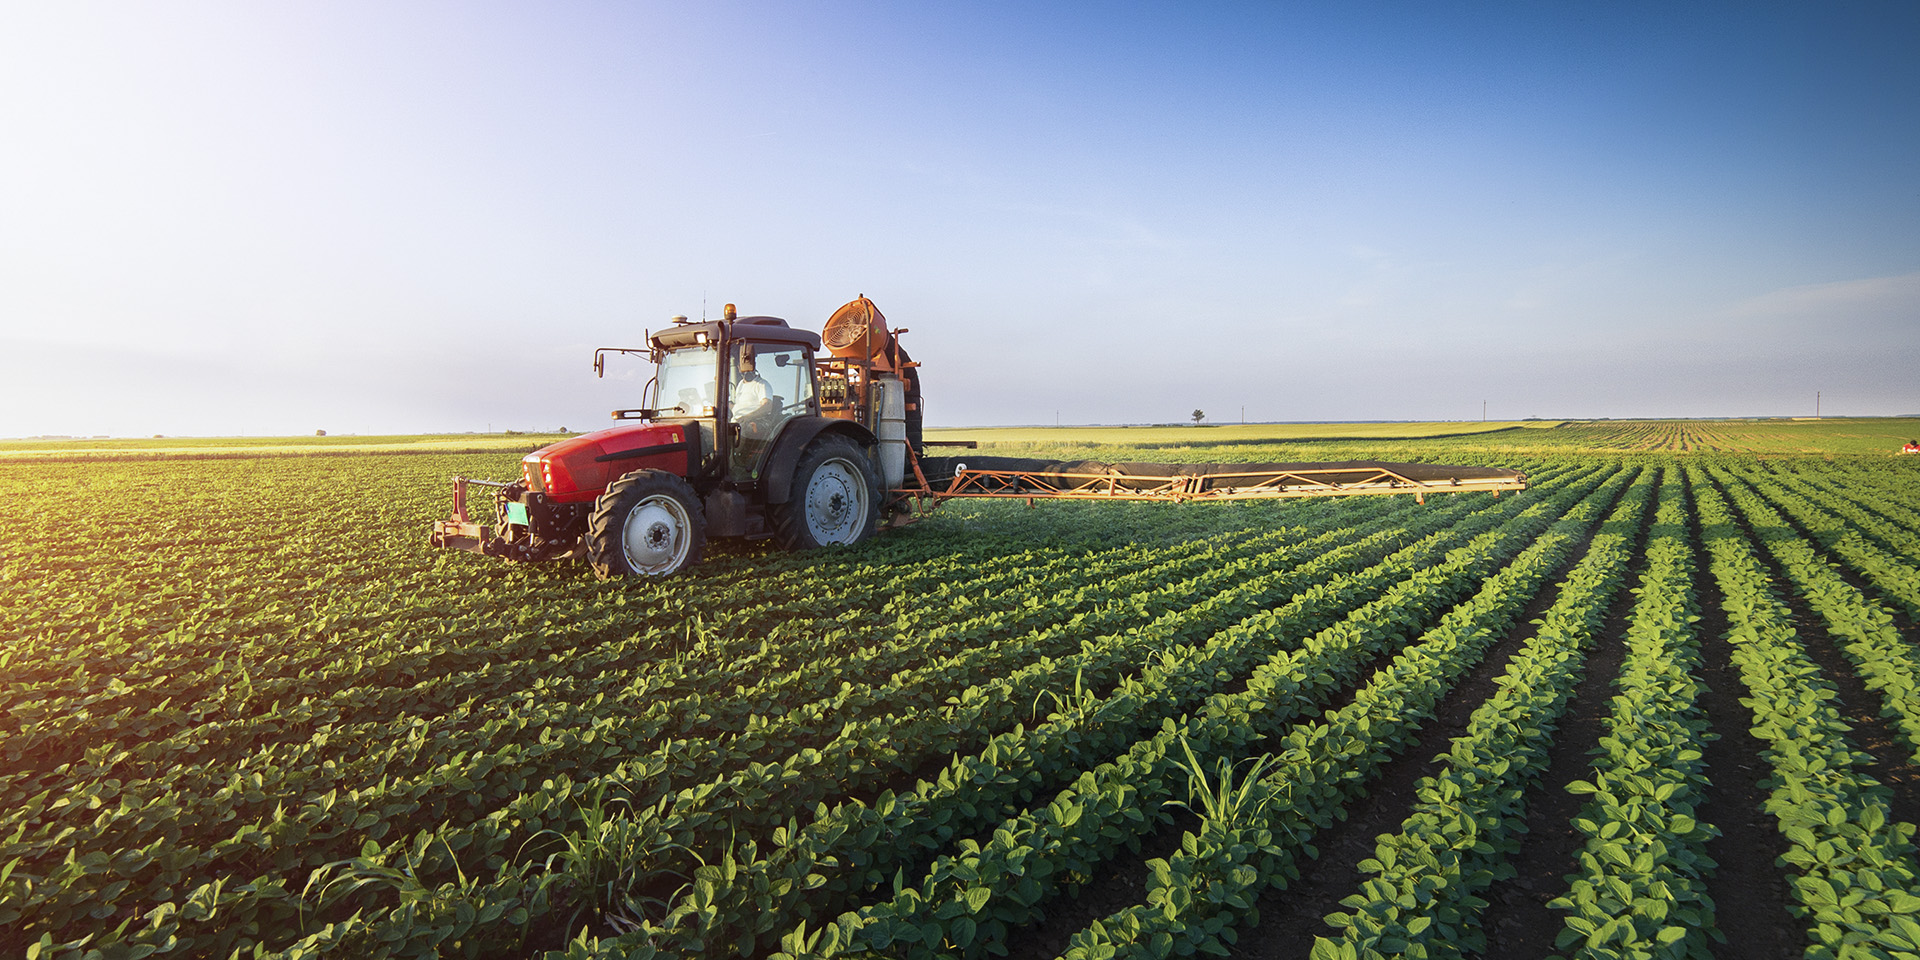 Increasing the application of IoT sensors in agriculture